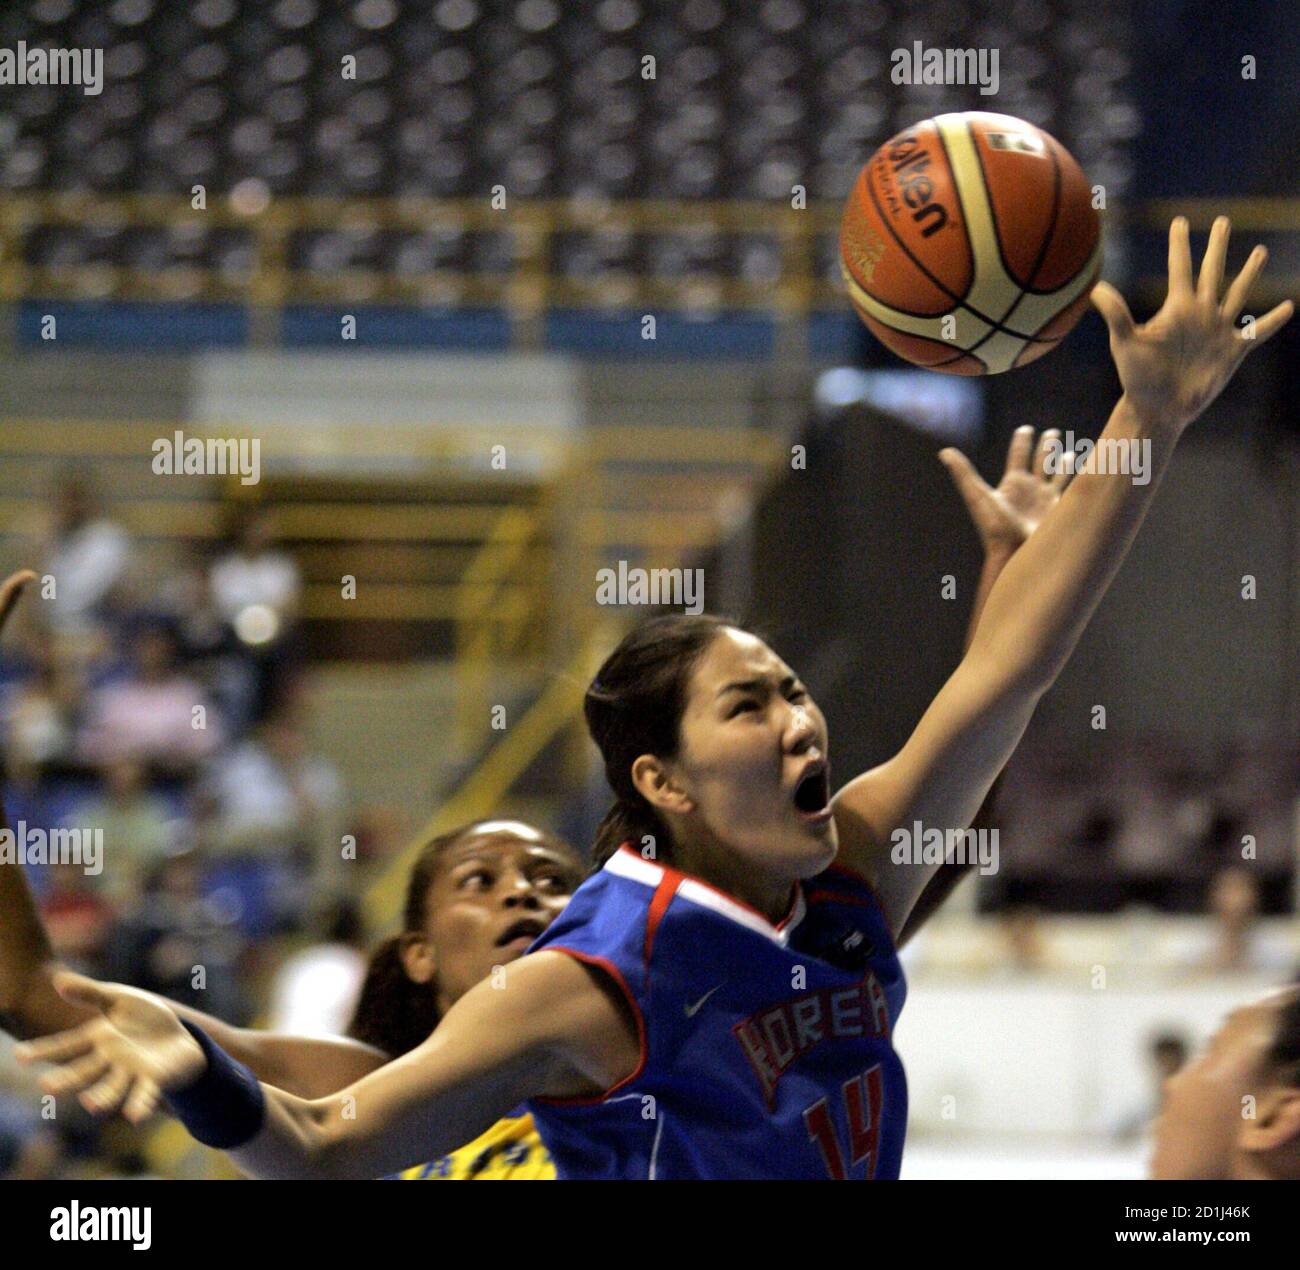 Brazil's Alessandra Oliveria (L) fights with South Korea's Kim Kwe Ryong for the ball during their 15th Women?s World Basketball Championship in Sao Paulo September 13, 2006. REUTERS/Paulo Whitaker  (BRAZIL) Stock Photo